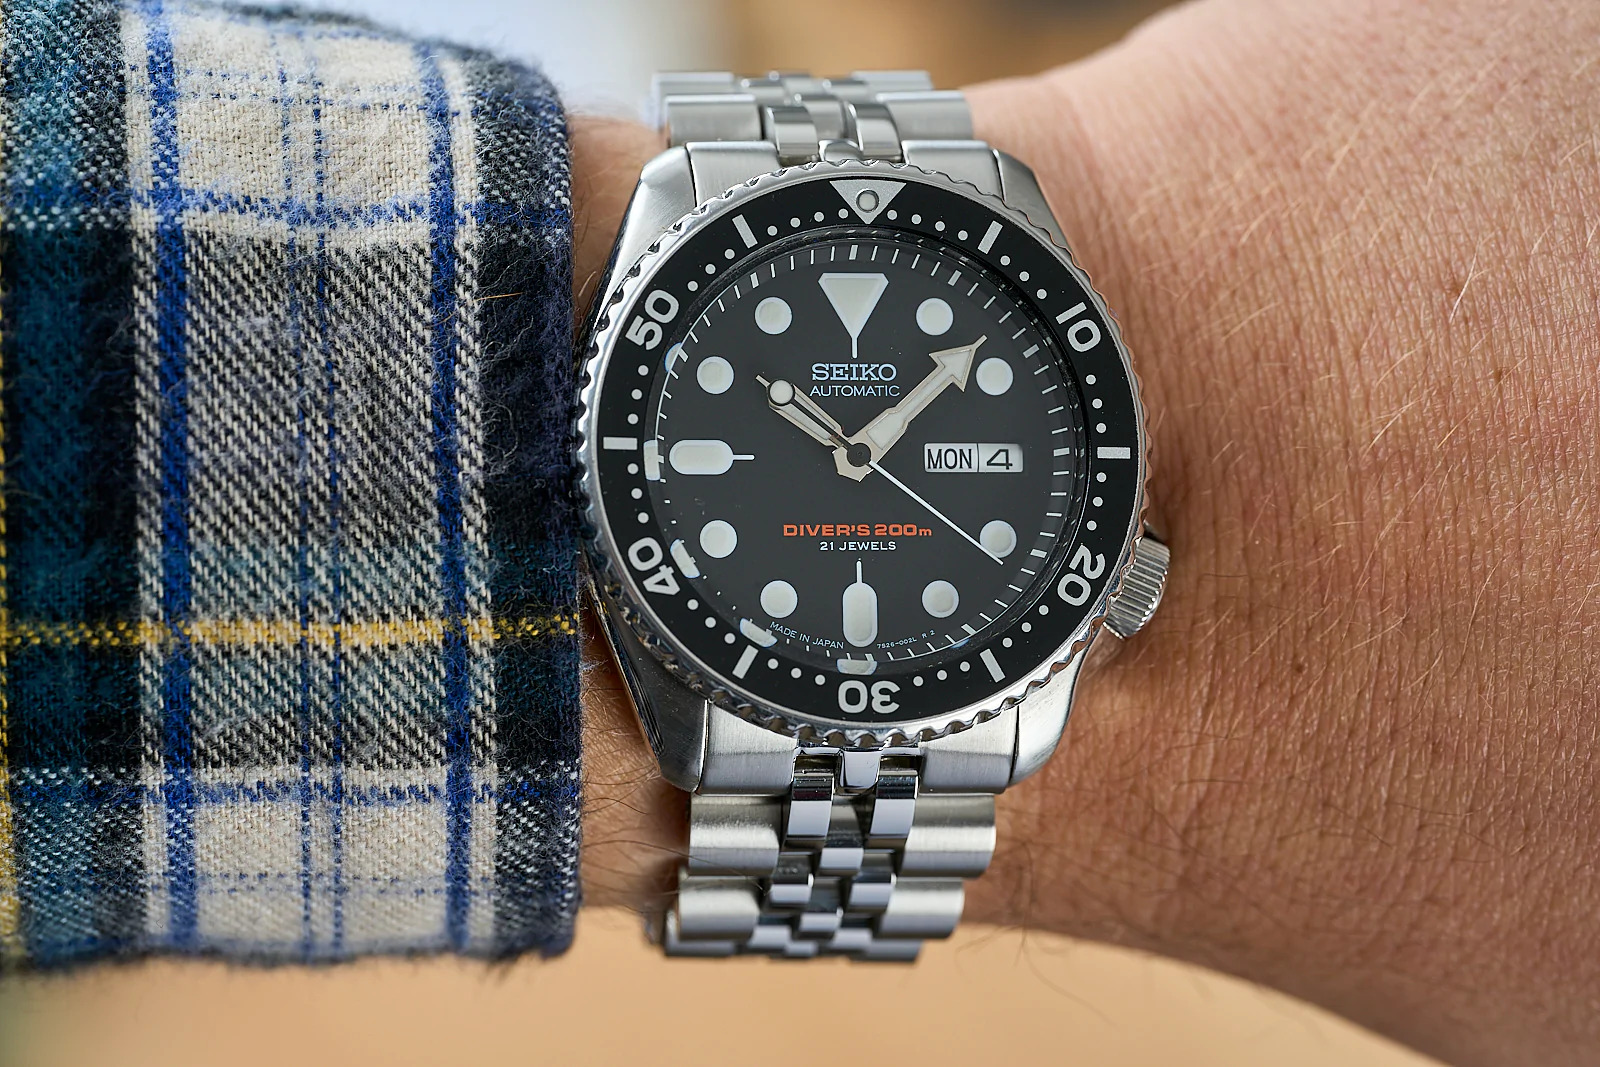 All about the Seiko SKX013